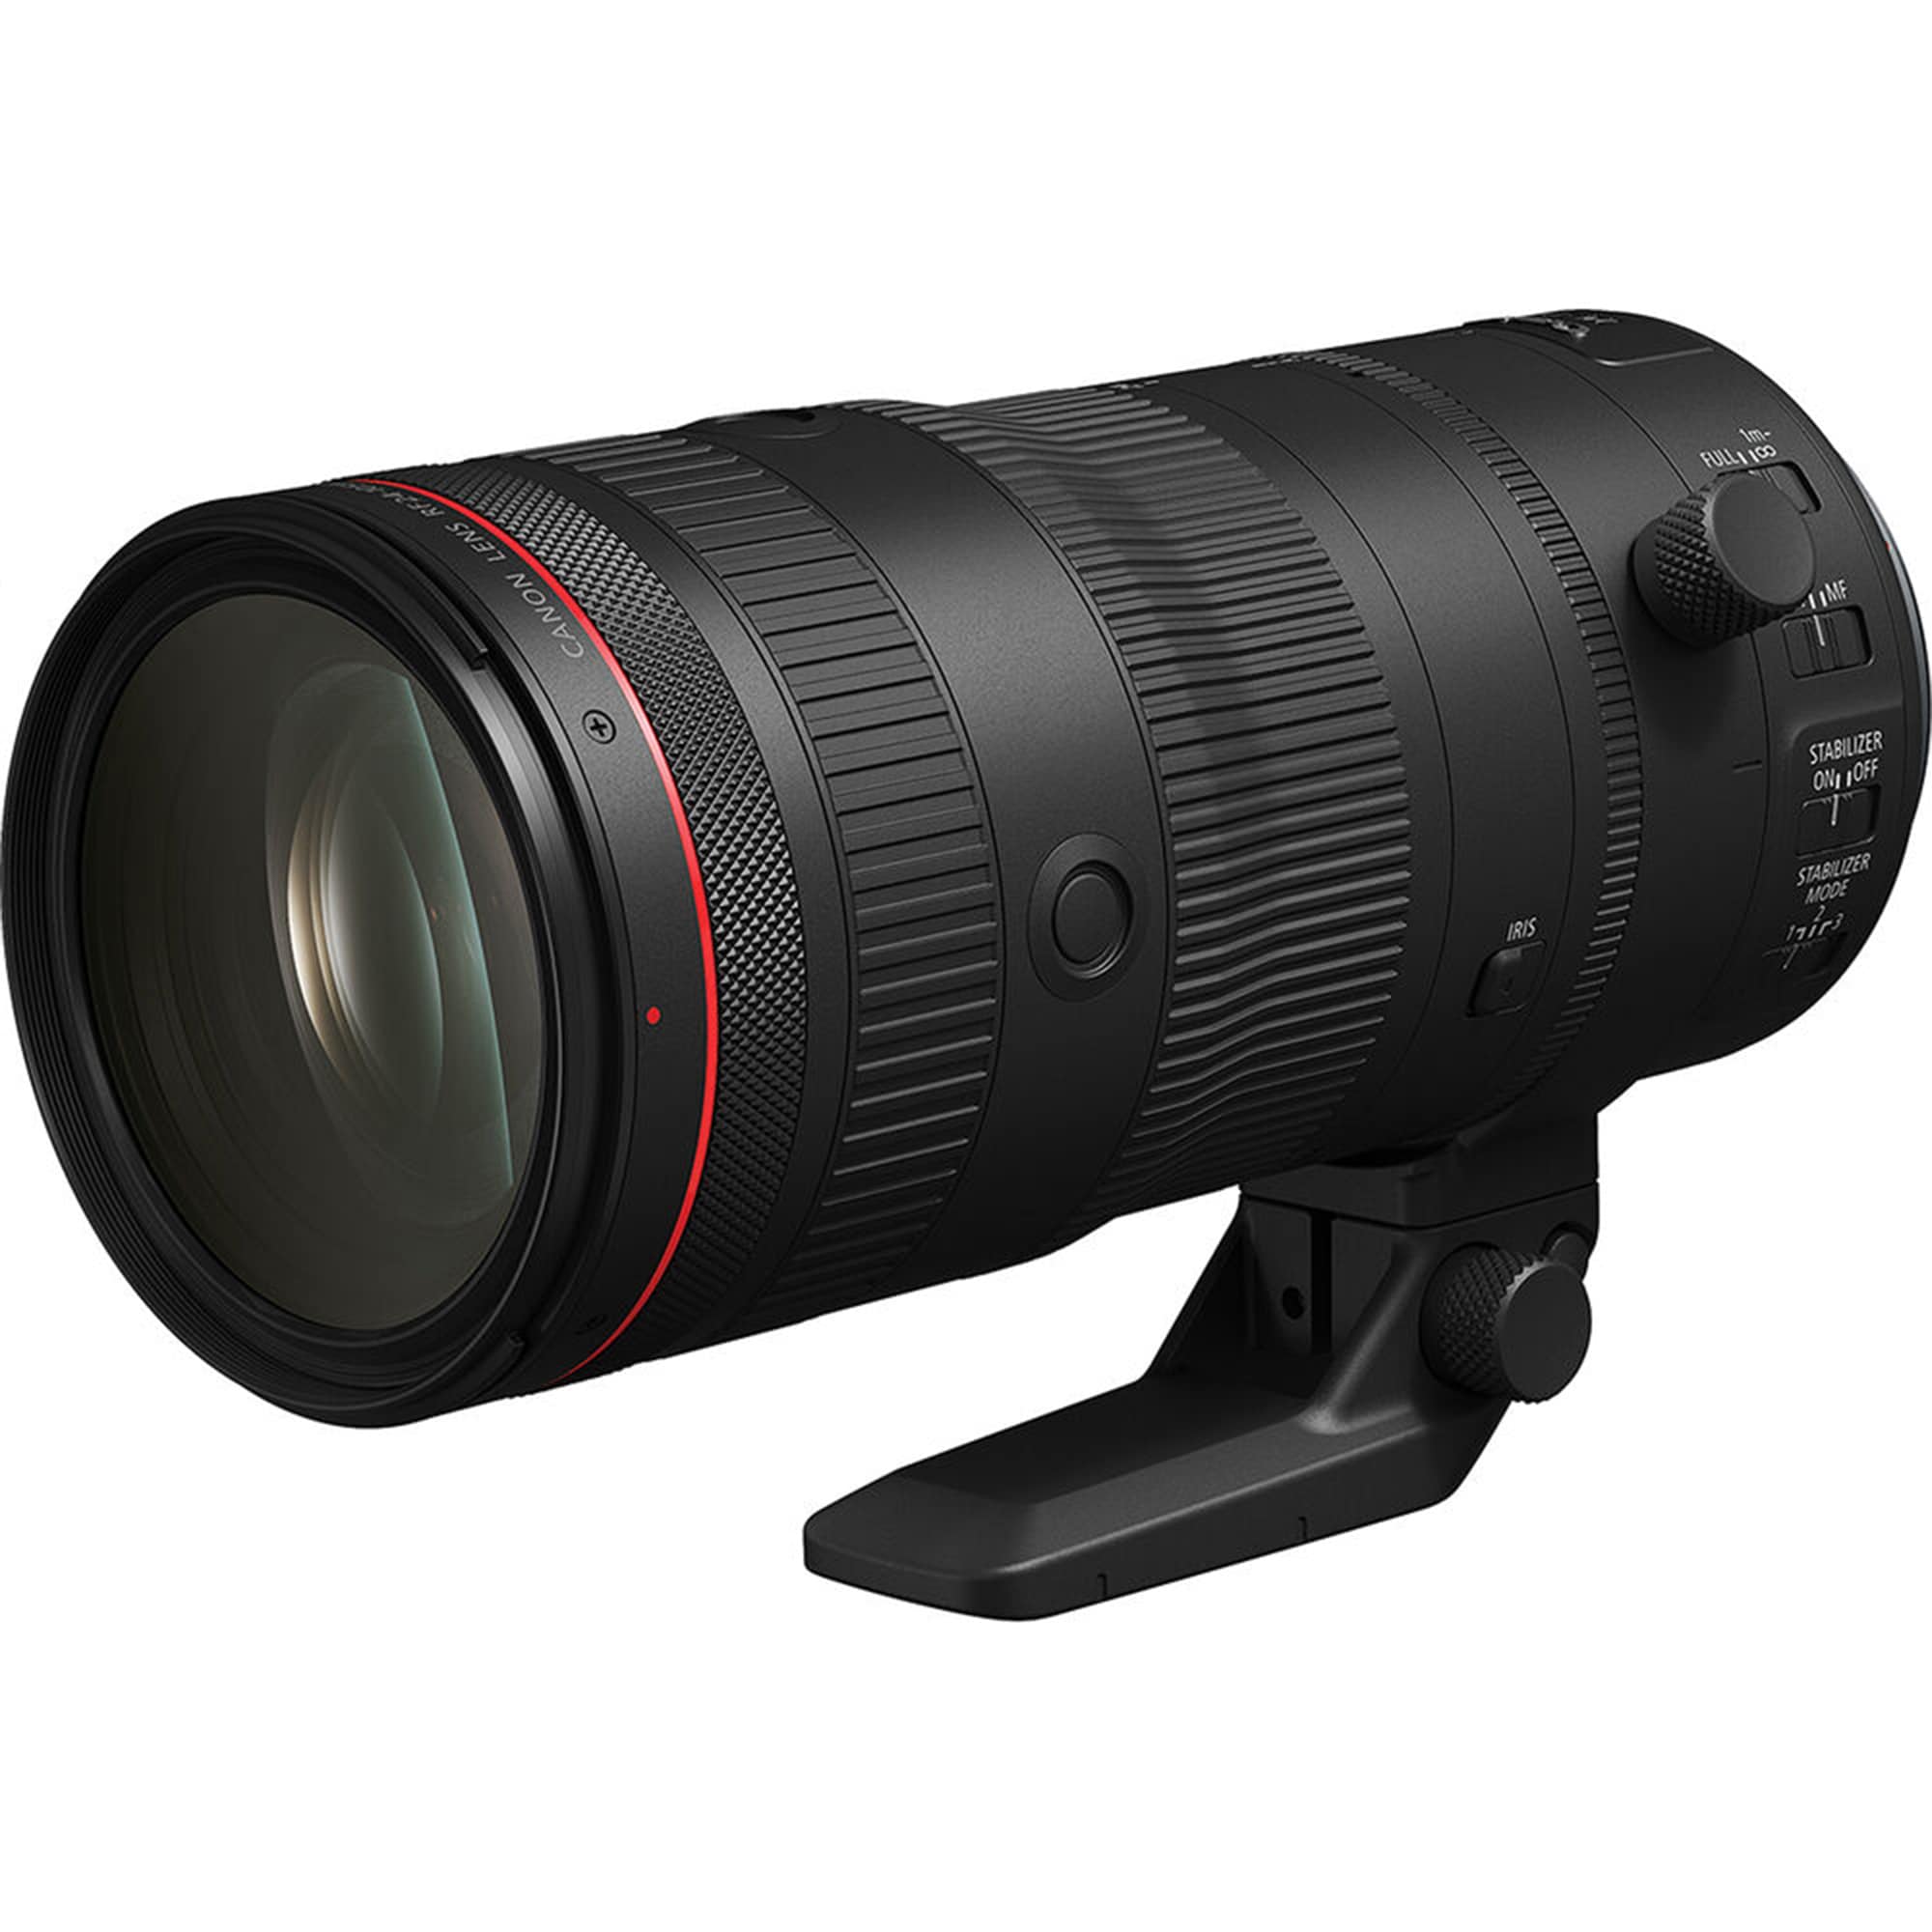 Canon RF 24-105mm f/2,8L IS USM Z